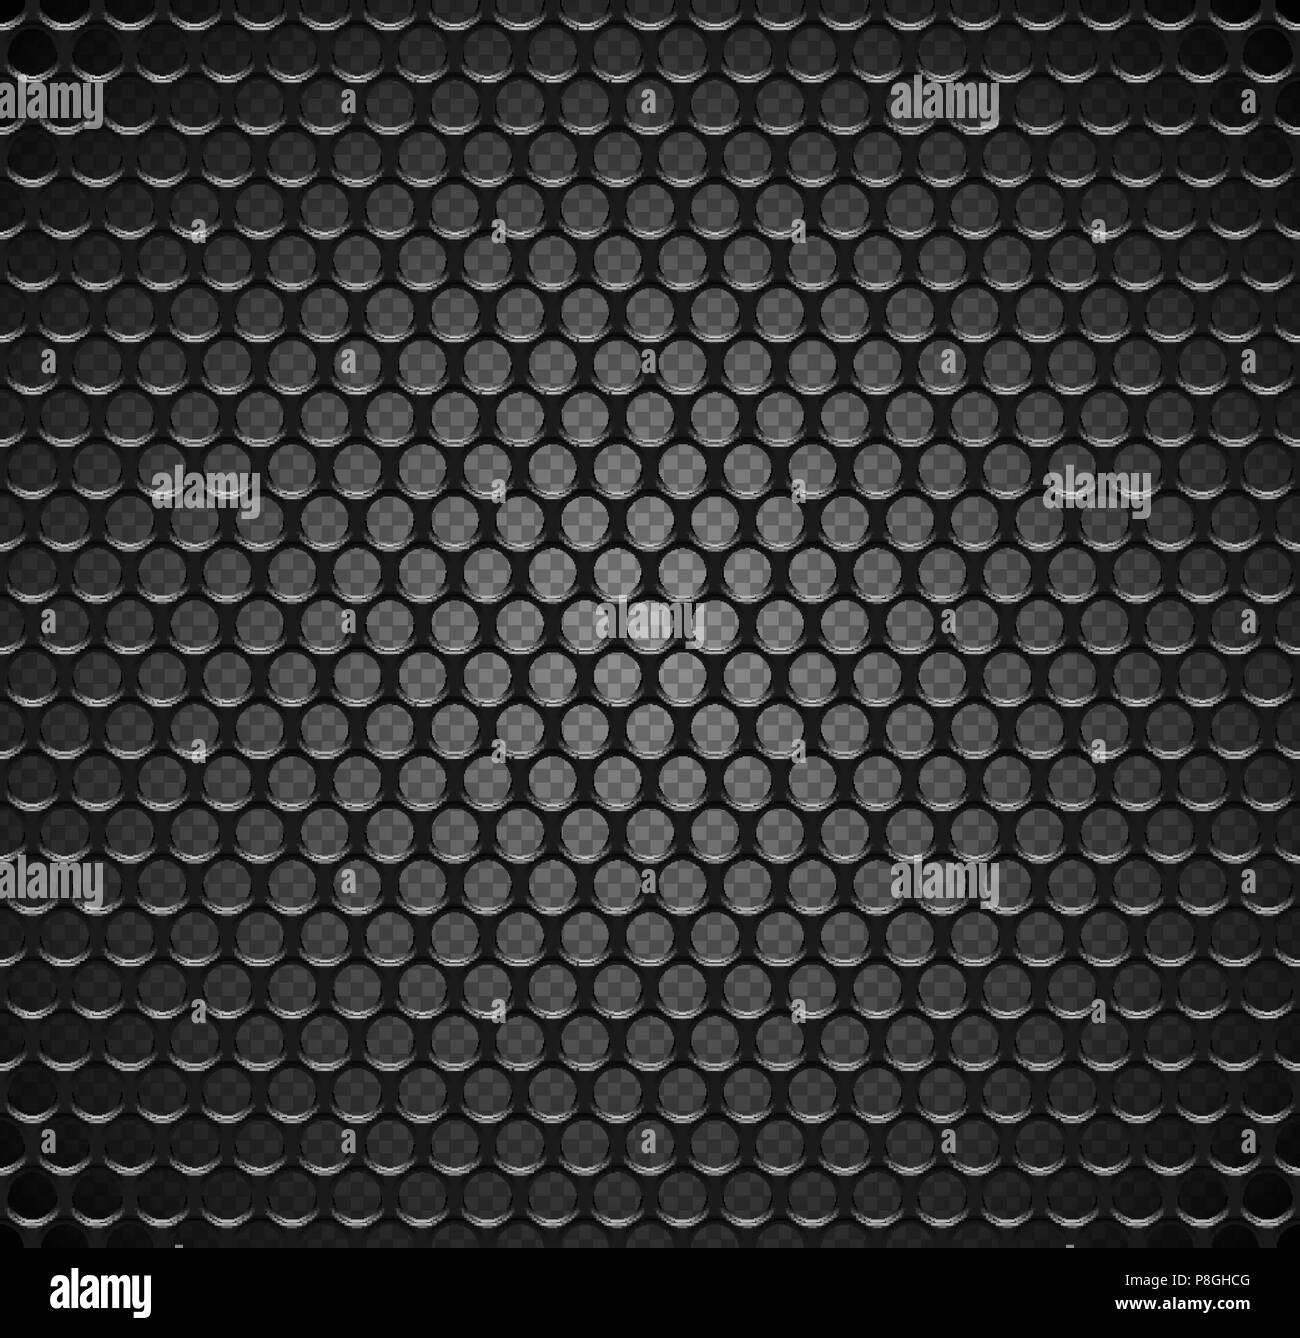 Vector metal grid seamless pattern on transparent background. Black iron speaker grill endless texture. Web page fill Stock Vector